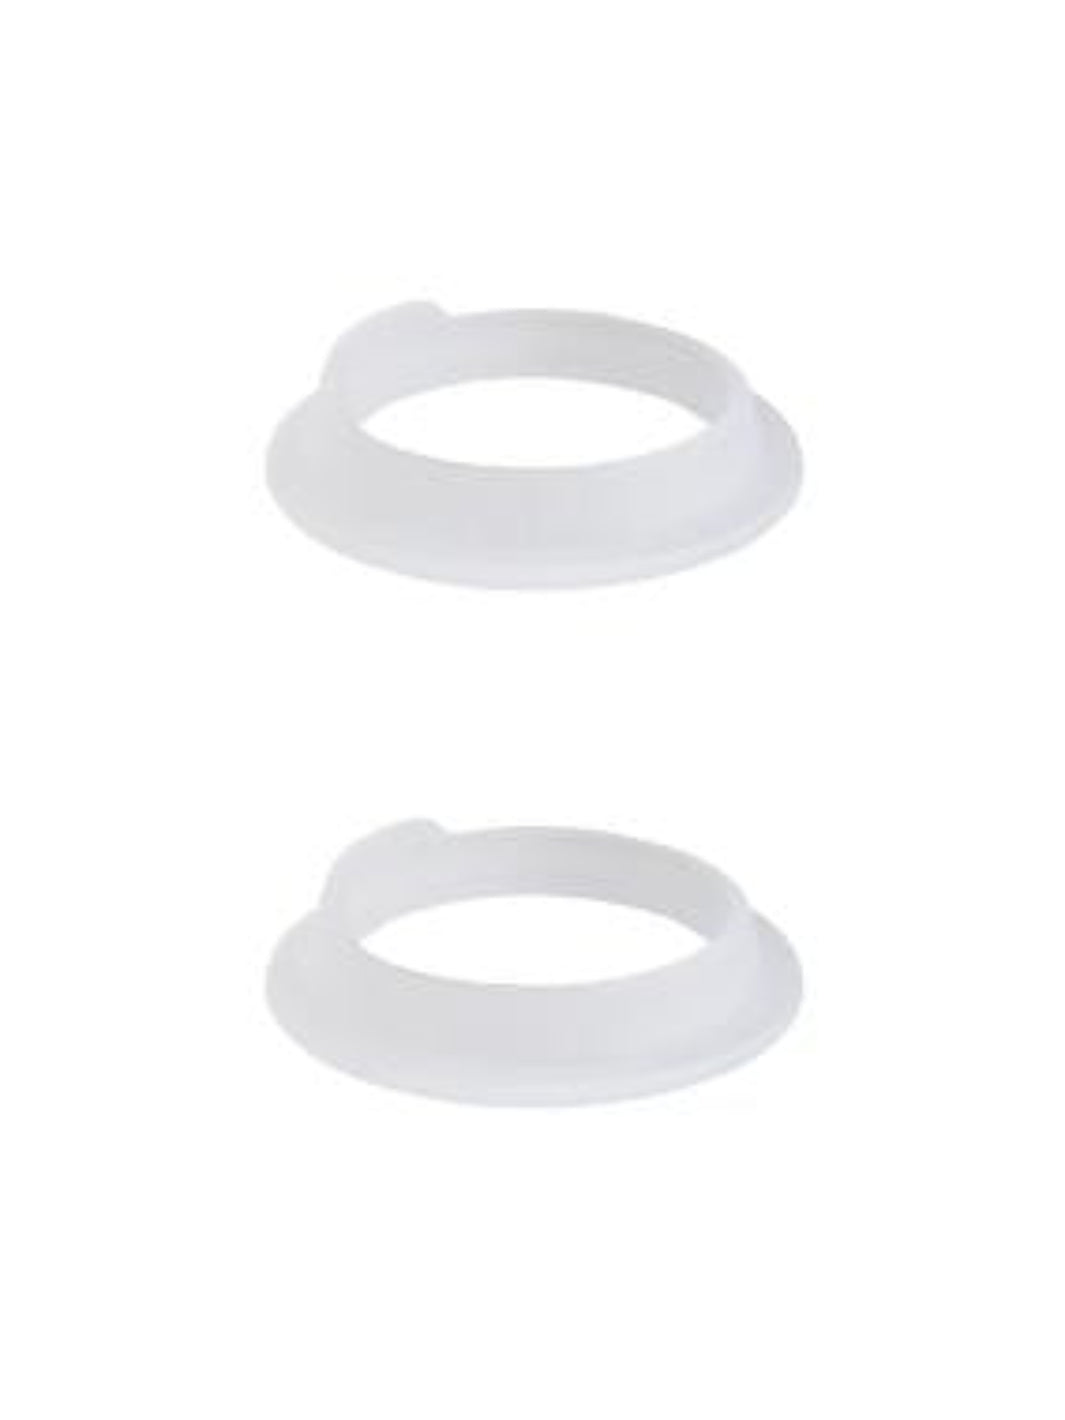 KINTO WATER BOTTLE Silicone Ring Set of 2 – Someware